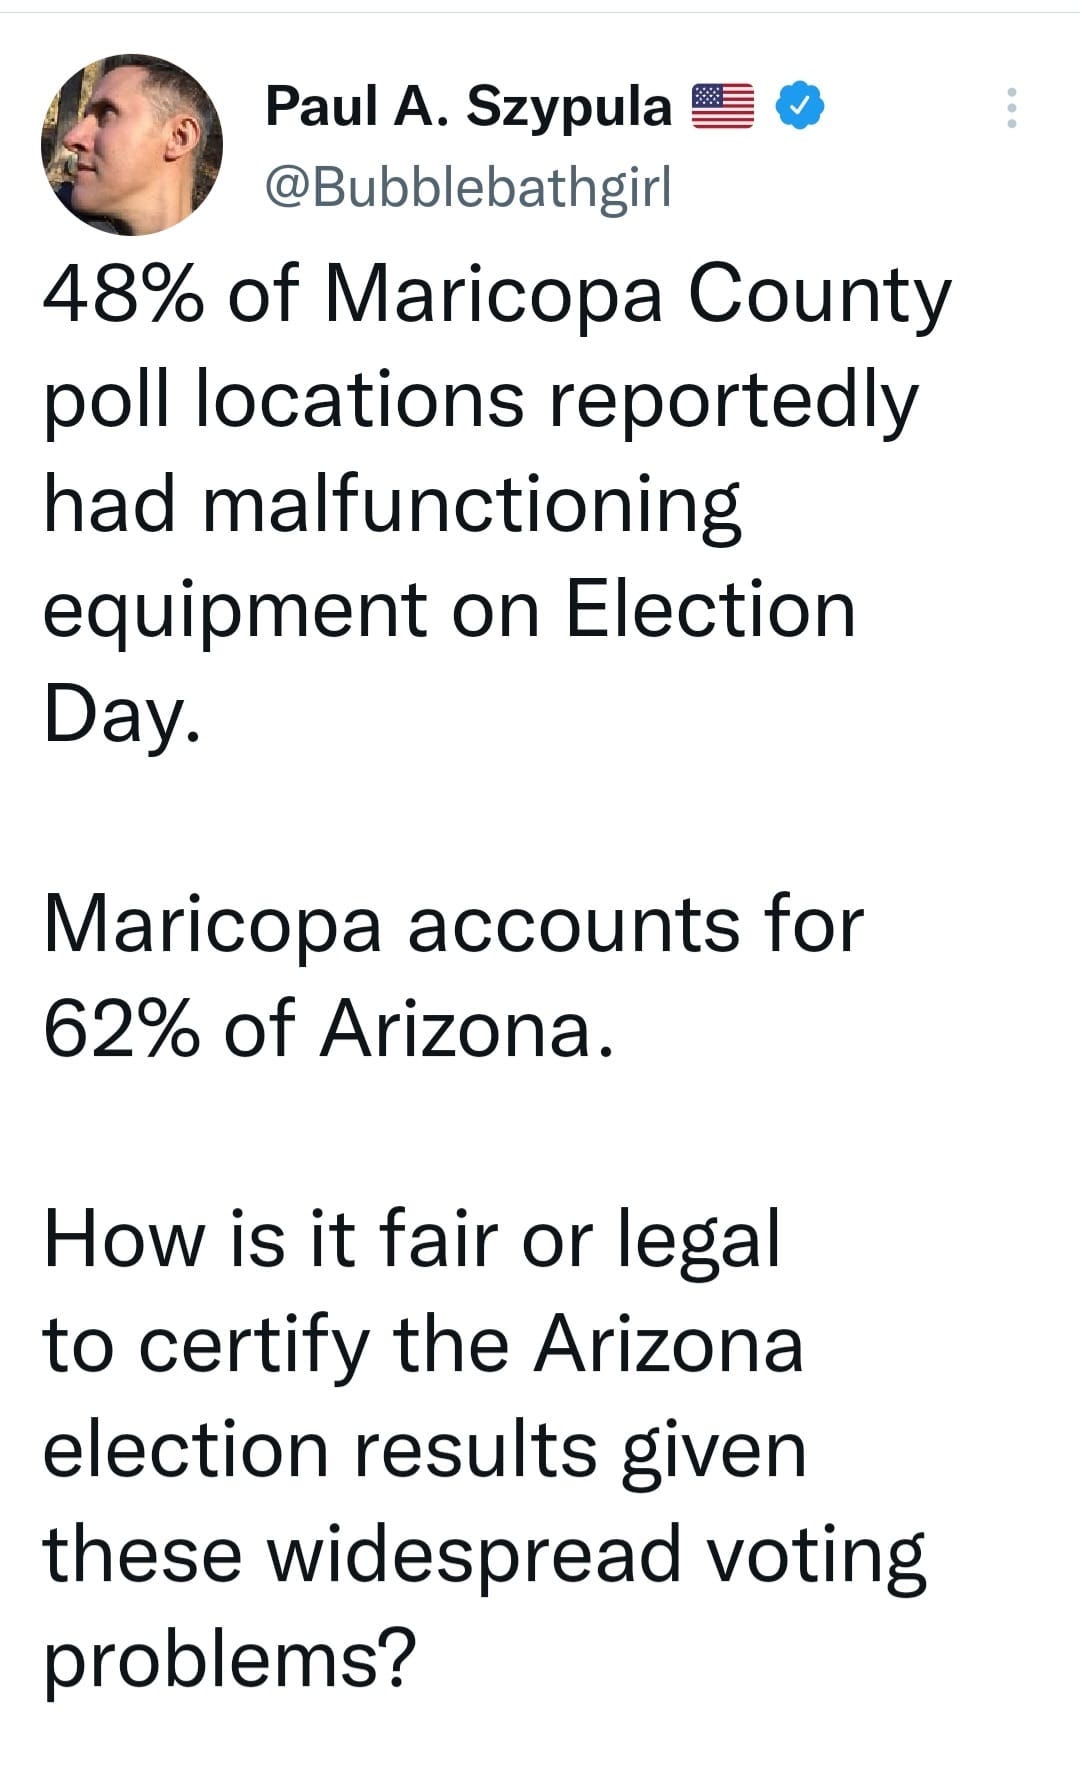 May be an image of 1 person and text that says 'Paul A. Szypula @Bubblebathgirl 48% of Maricopa County poll locations reportedly had malfunctioning equipment on Election Day. Maricopa accounts for 62% of Arizona. How is it fair or legal to certify the Arizona election results given these widespread voting problems?'